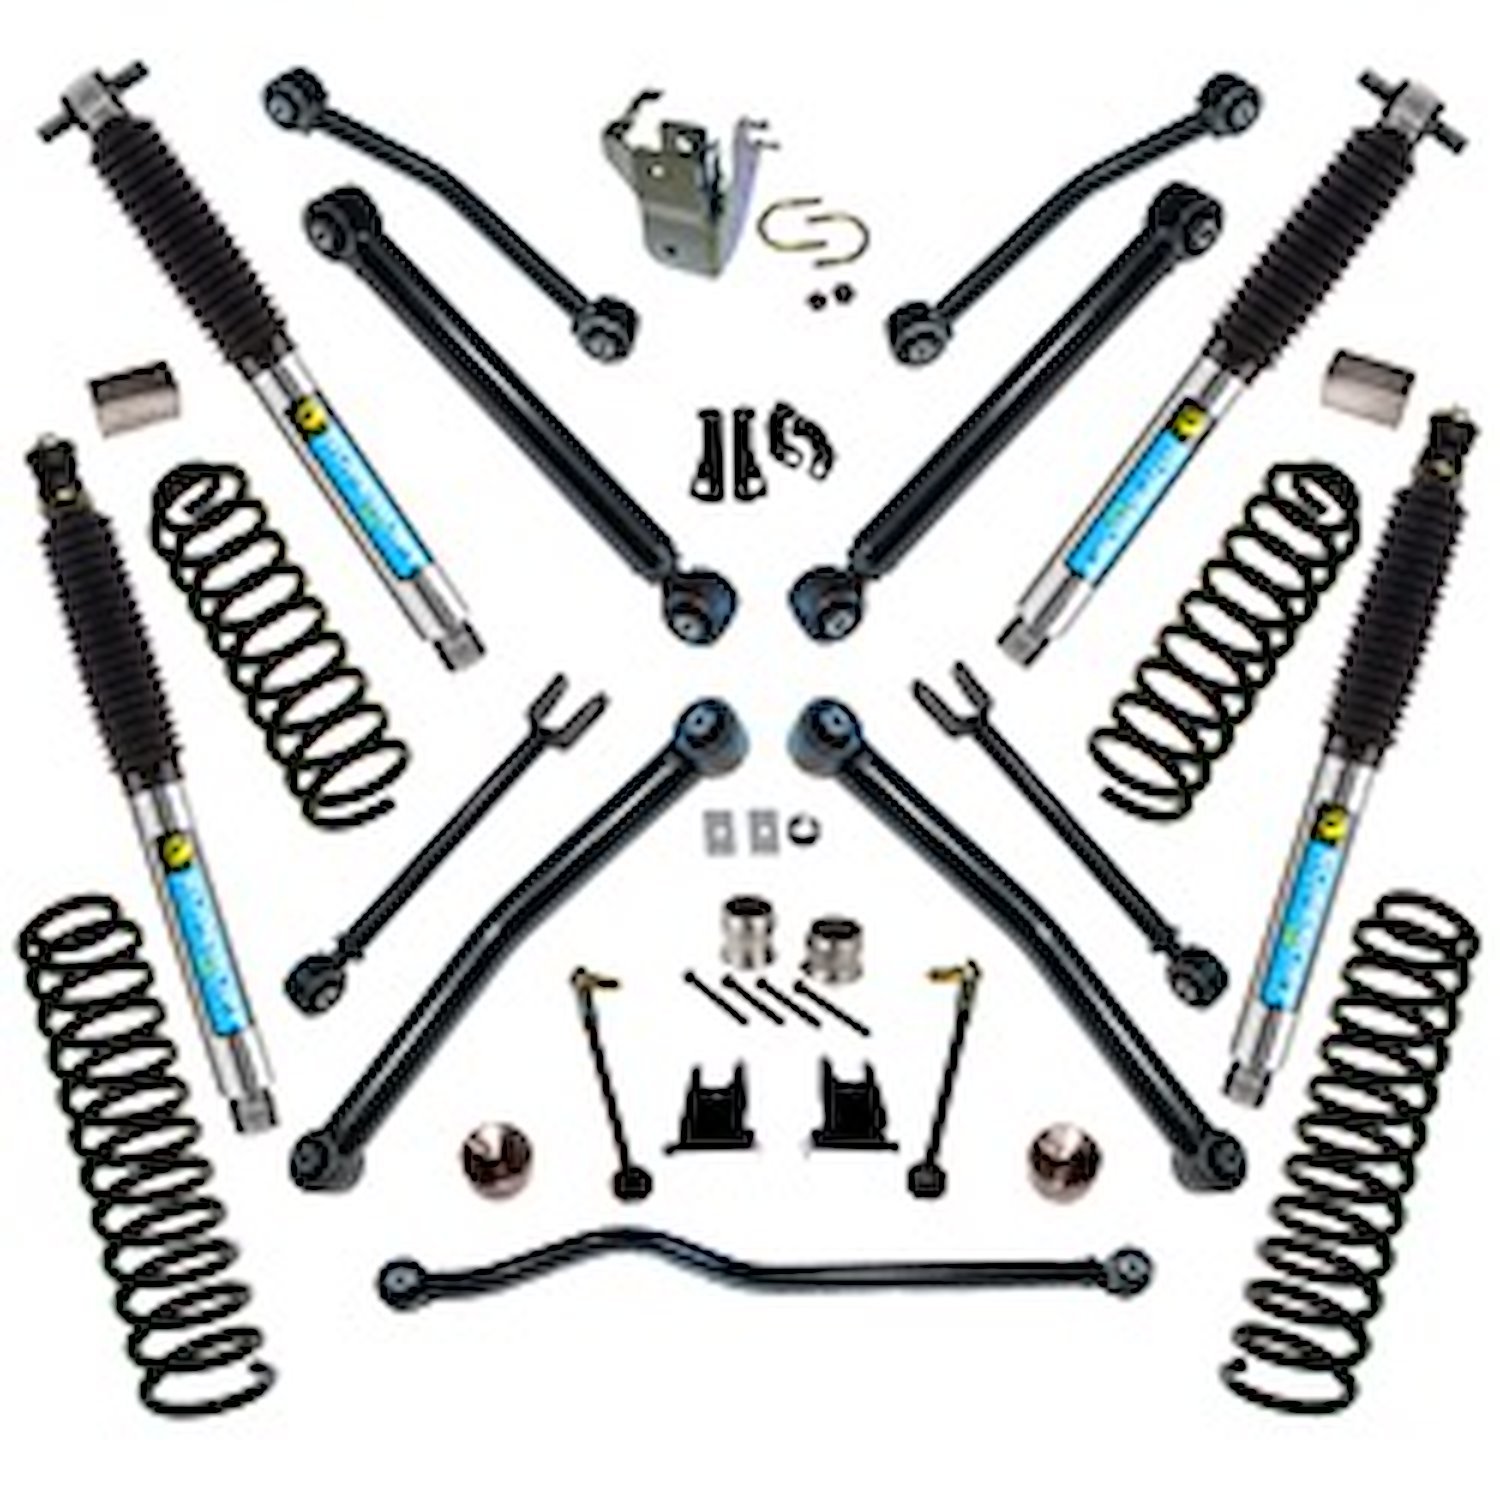 K997B Front and Rear Suspension Lift Kit, Lift Amount: 4 in. Front/4 in. Rear